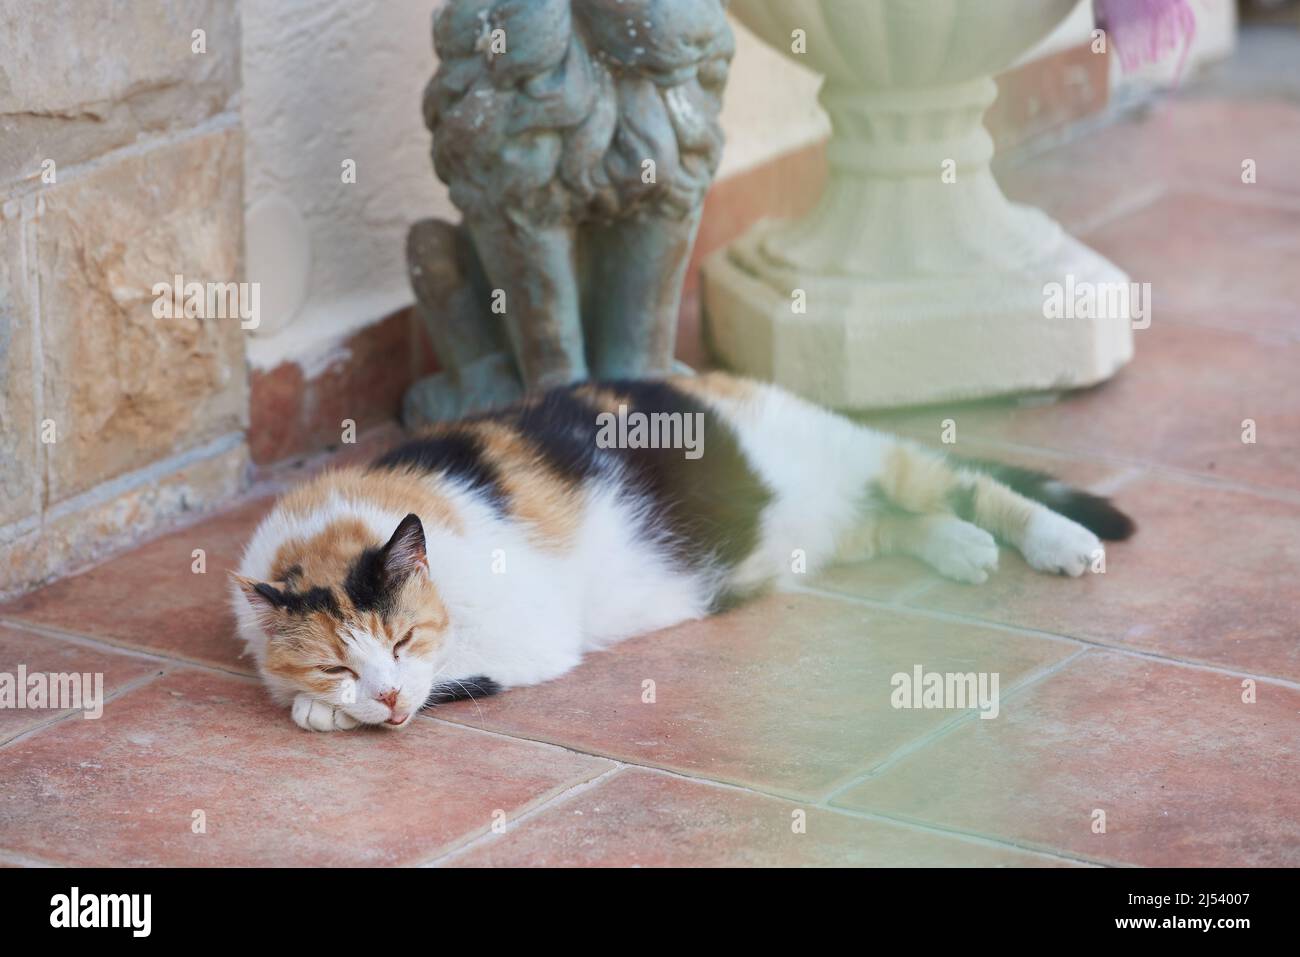 A cat with an open mouth sleeps on a tile on a hot day Stock Photo